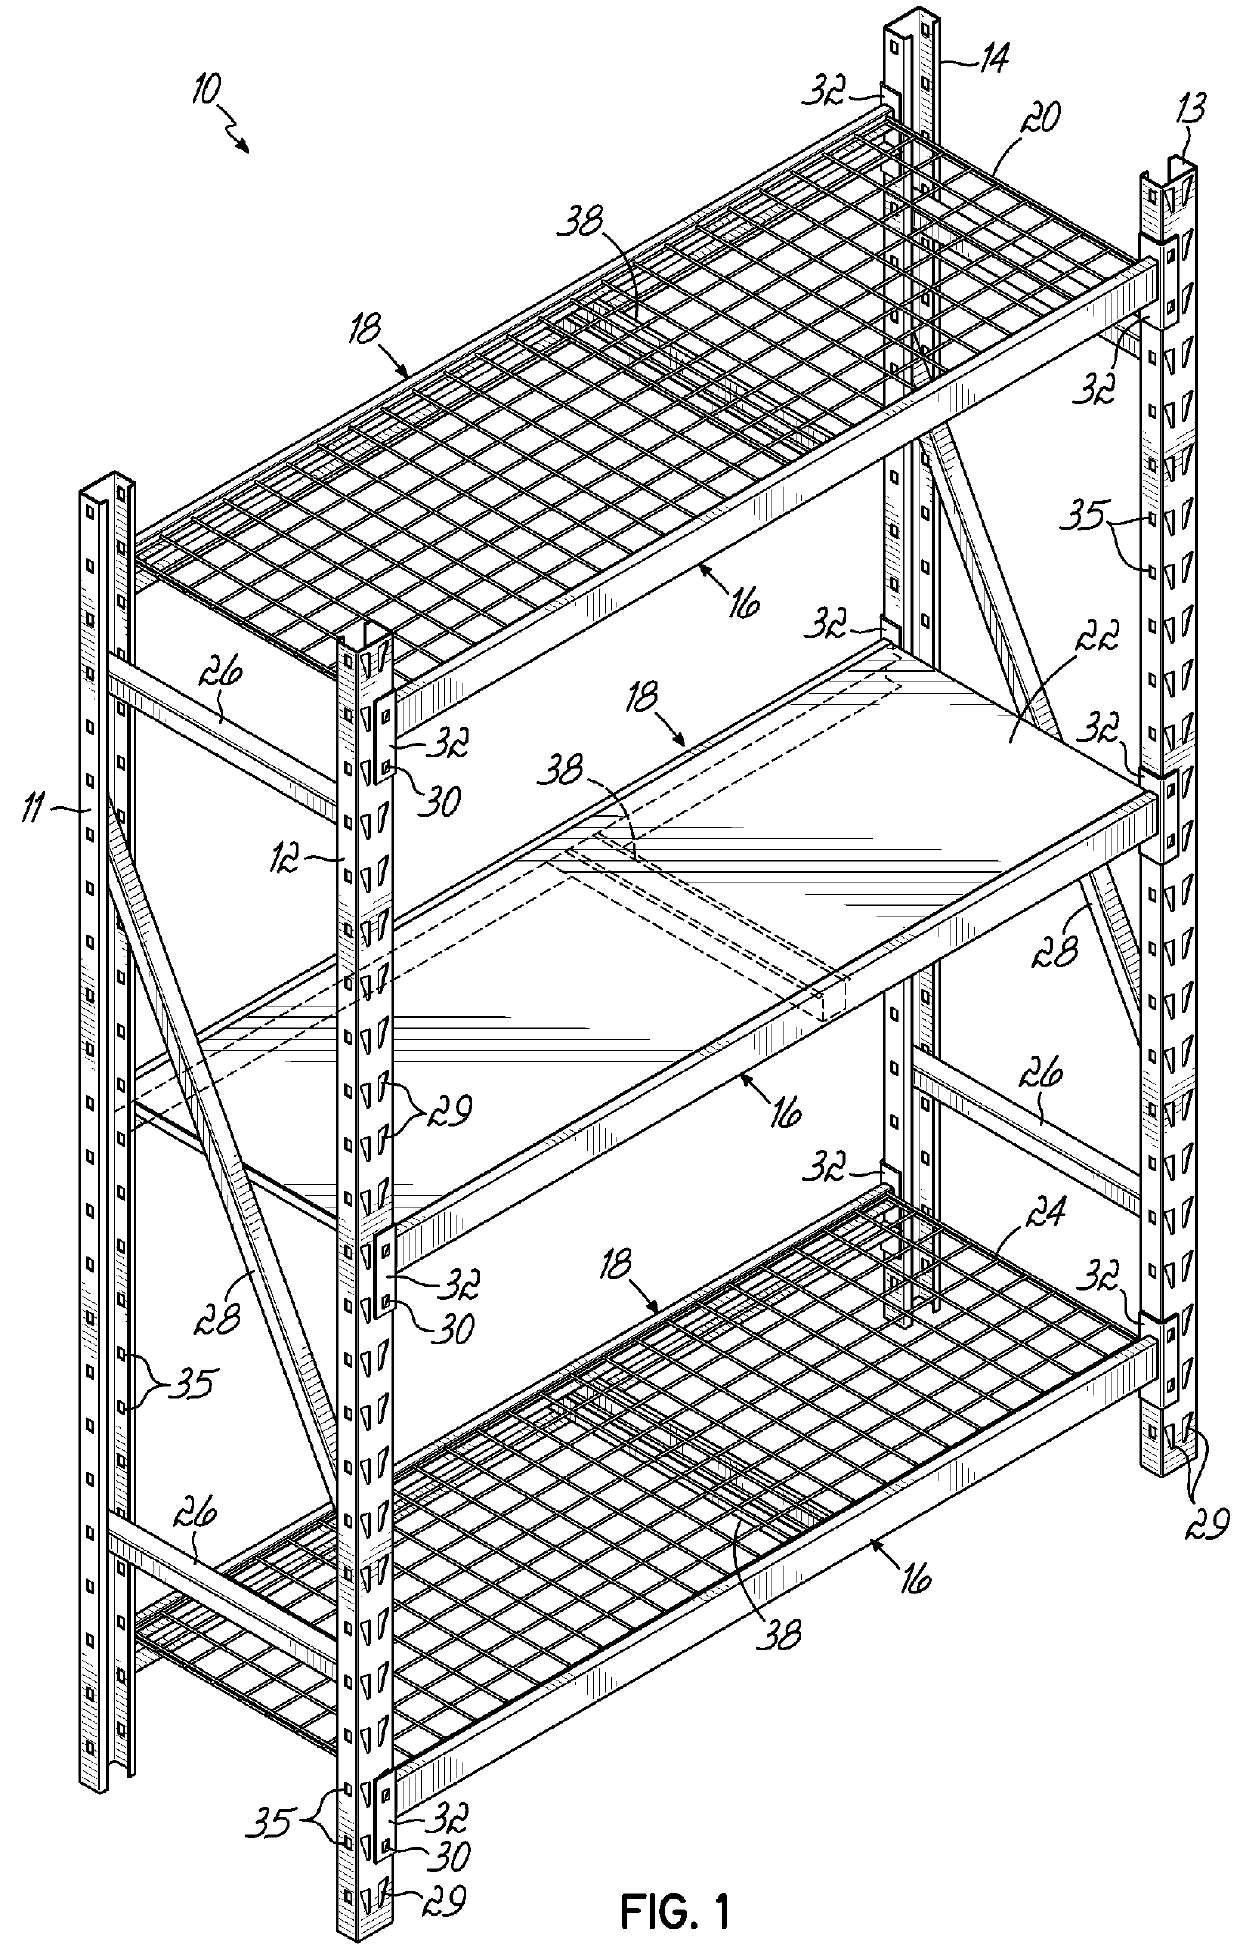 Portion of shelf and support for shelving unit